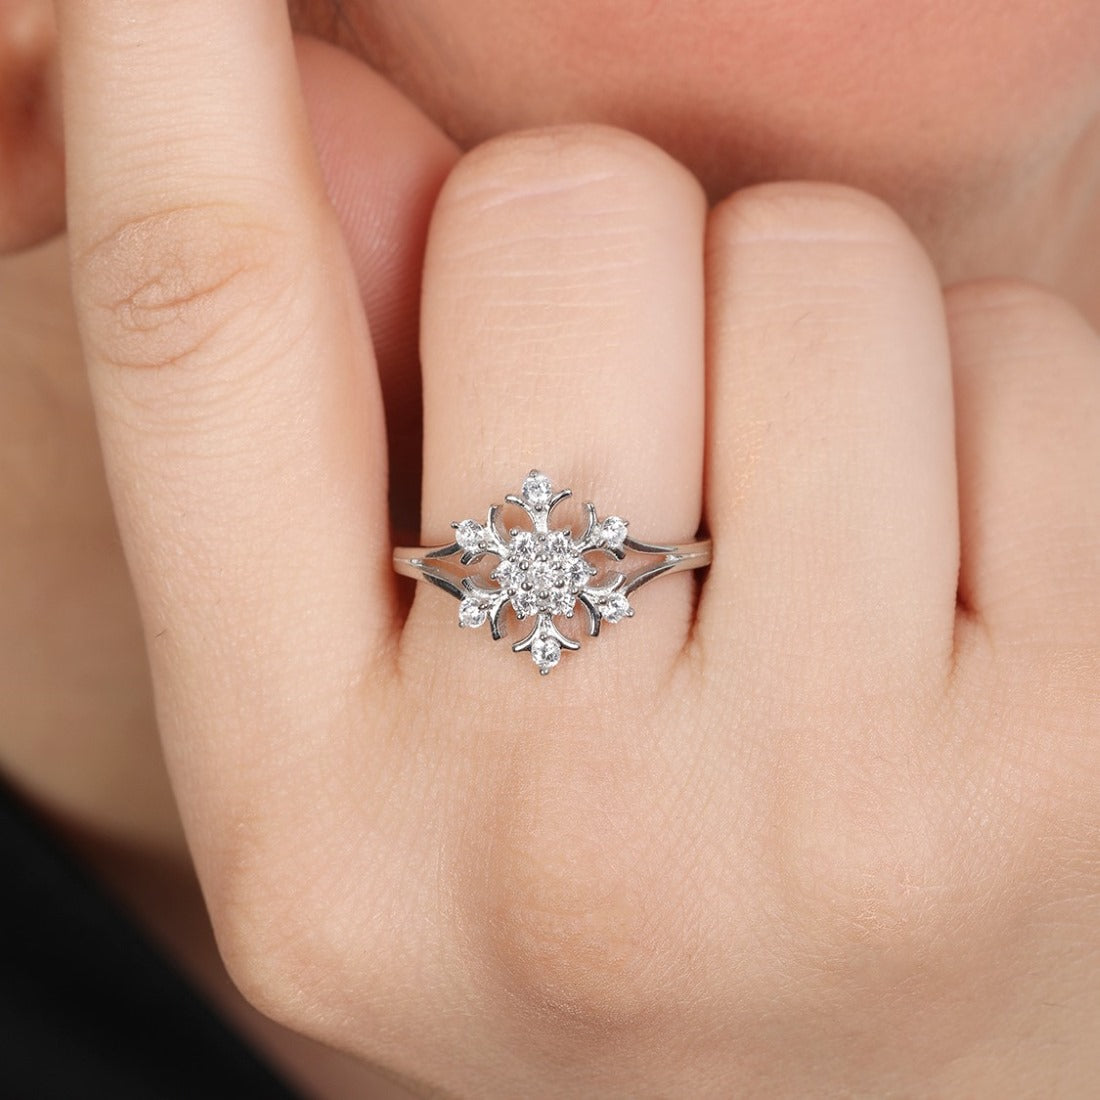 Floral Radiance Rhodium Plated 925 Sterling Silver Women's Ring